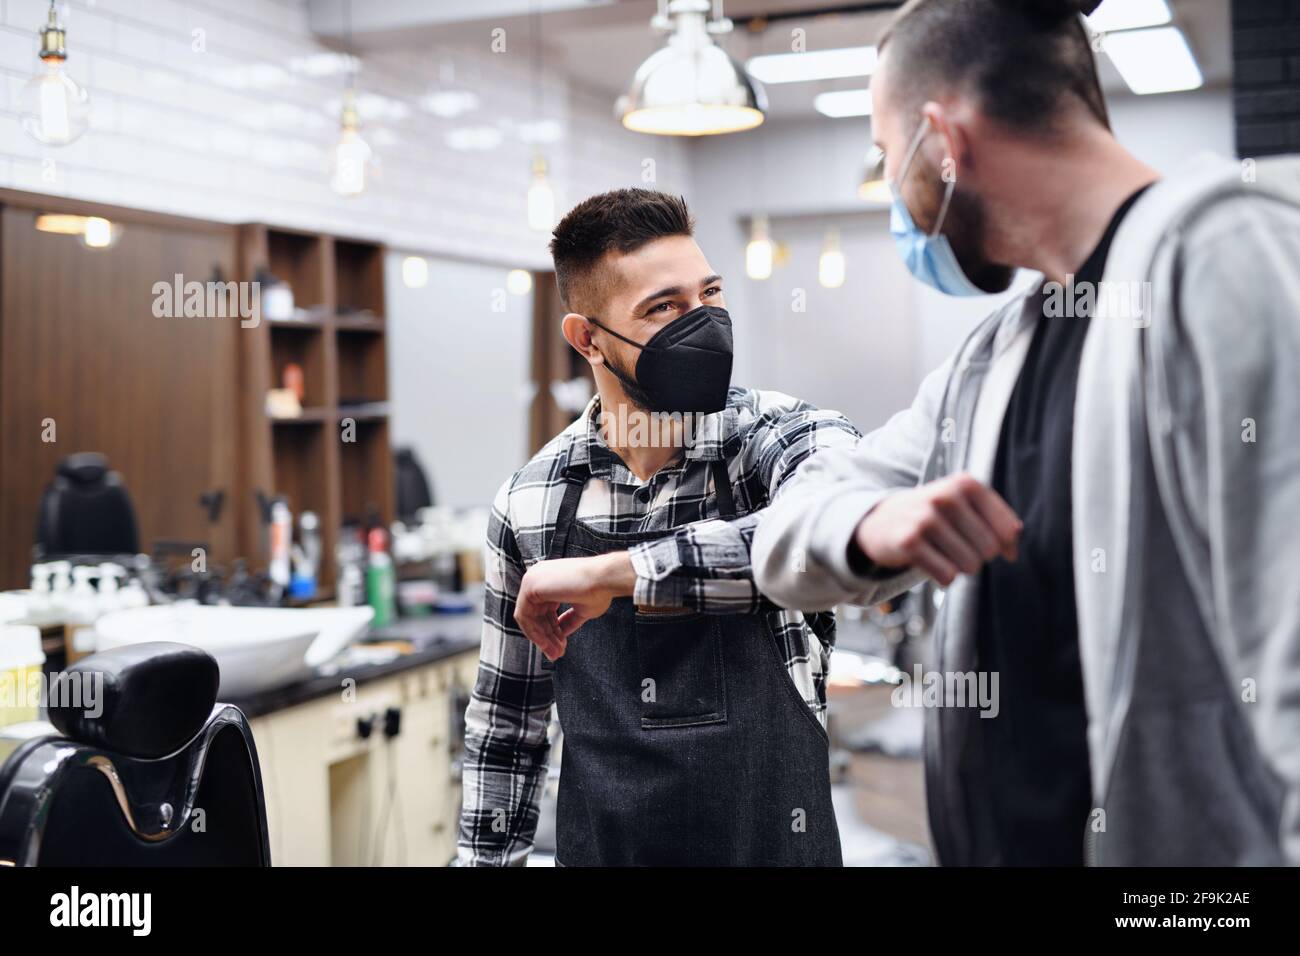 Man greeting haidresser with elbow bump in barber shop, coronavirus and new normal concept. Stock Photo